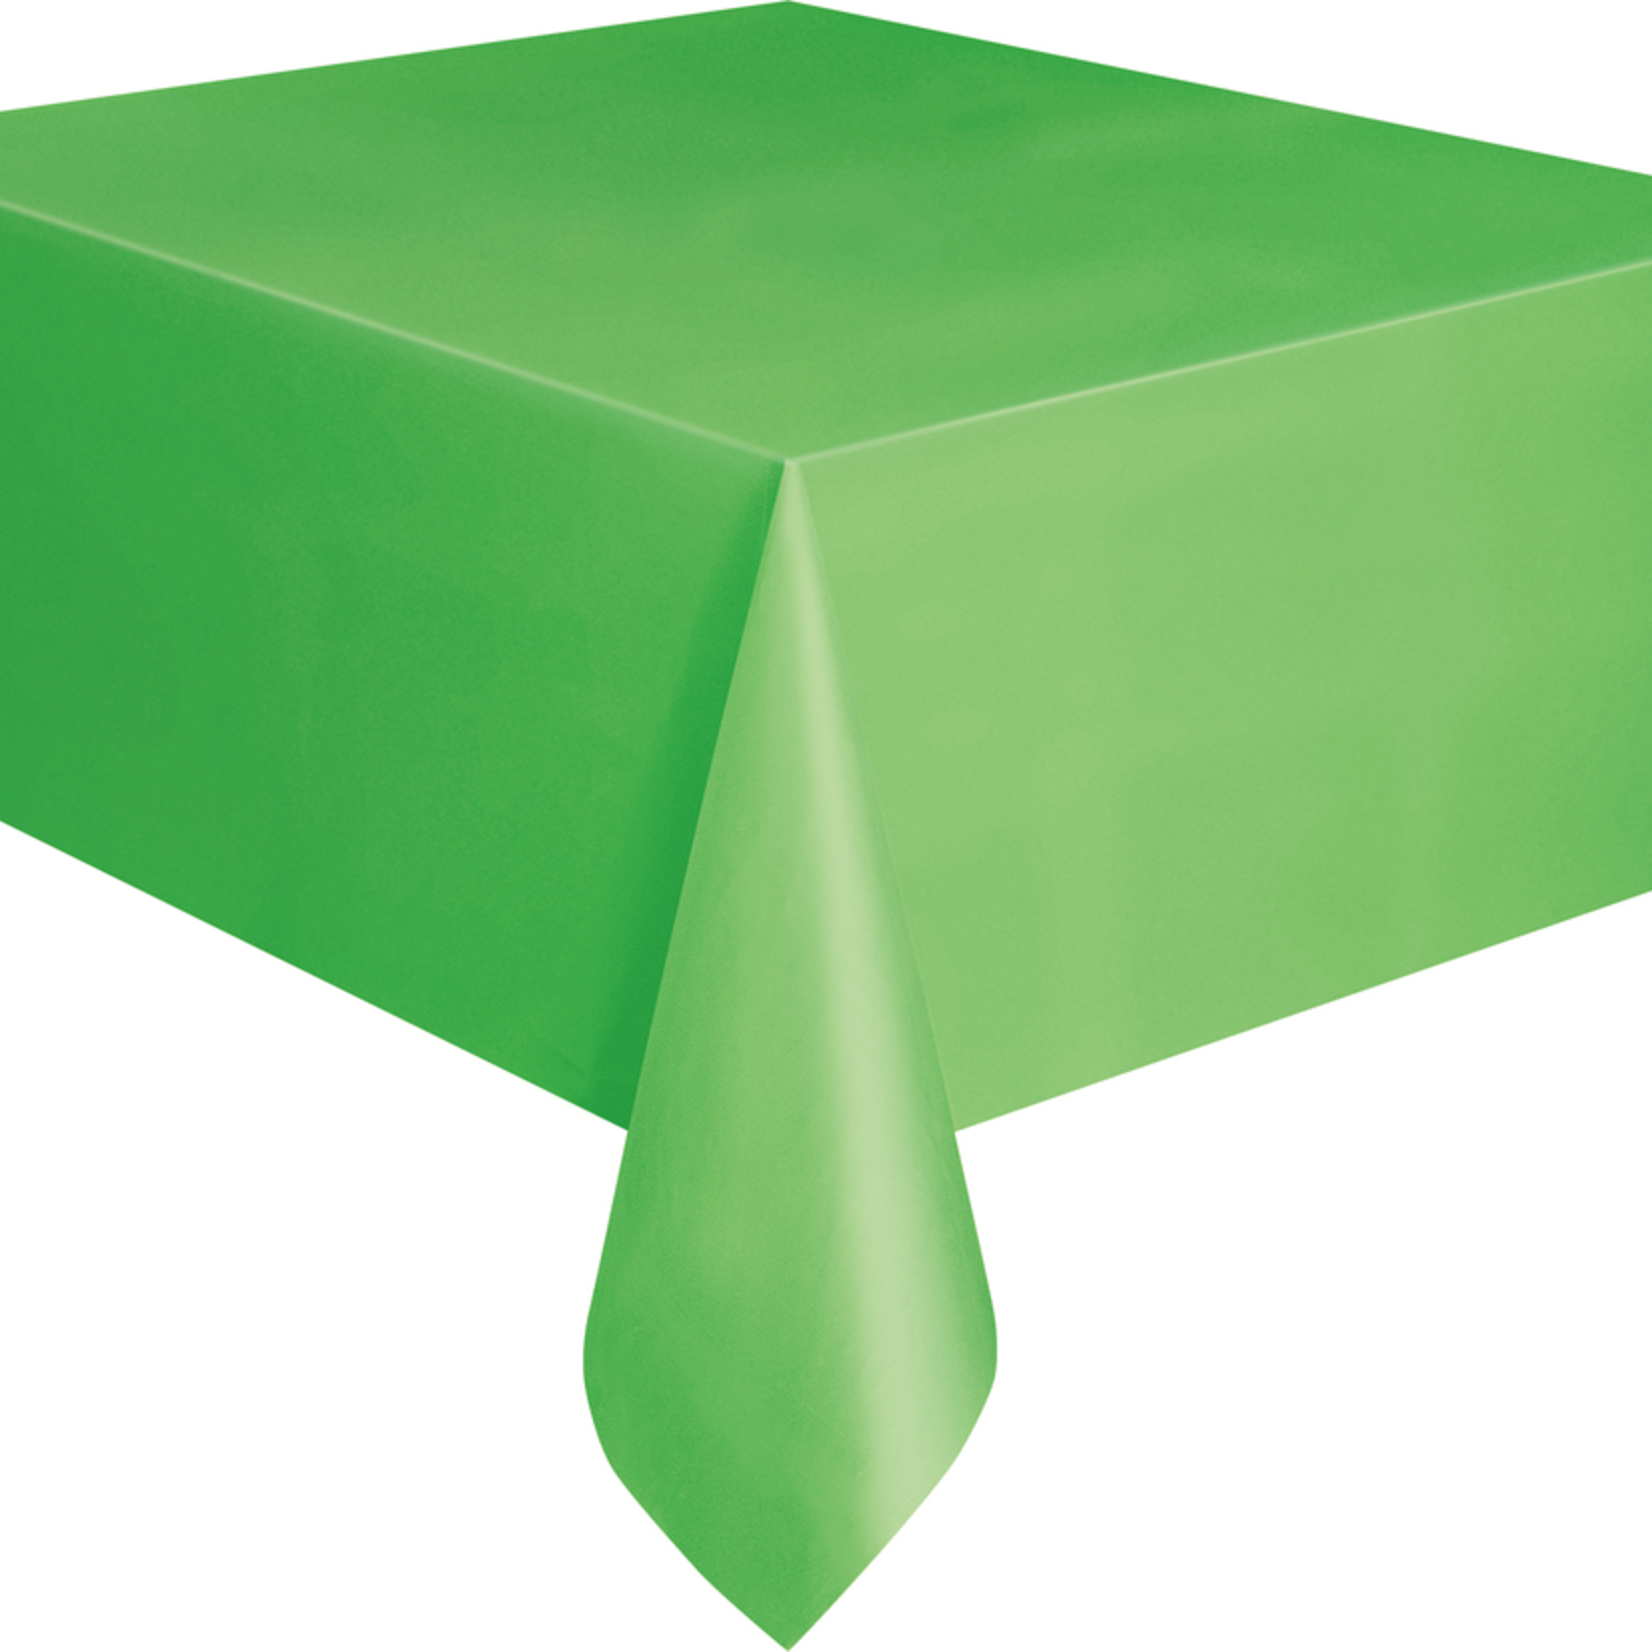 Plastic Tablecover 54""x108"" -Lime Green